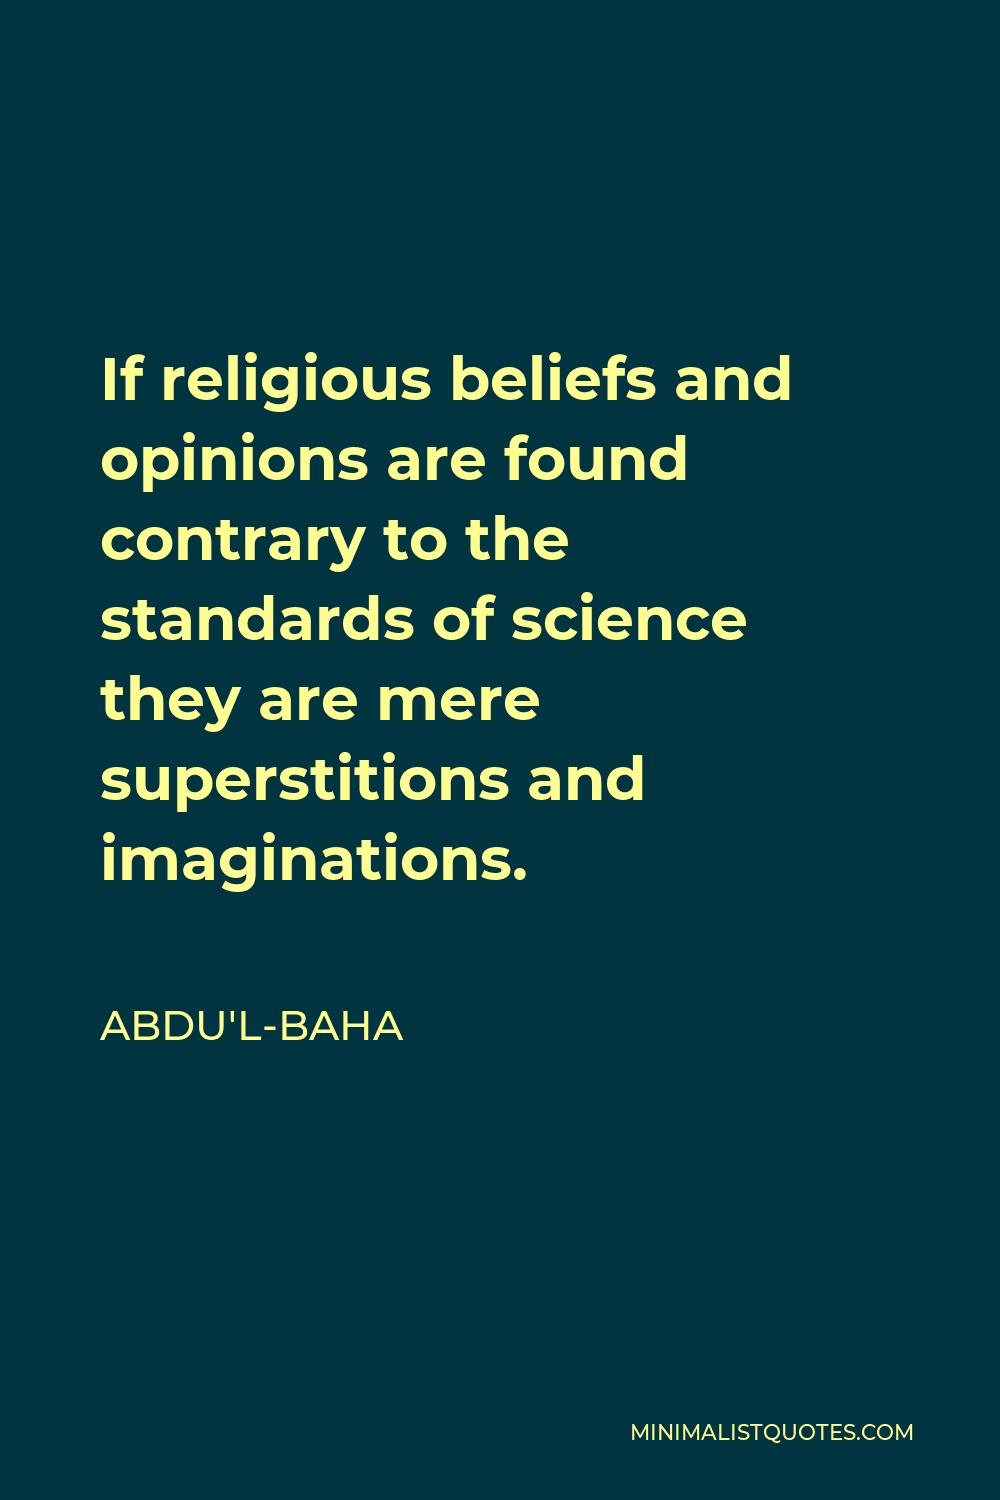 Abdu'l-Baha Quote - If religious beliefs and opinions are found contrary to the standards of science they are mere superstitions and imaginations.